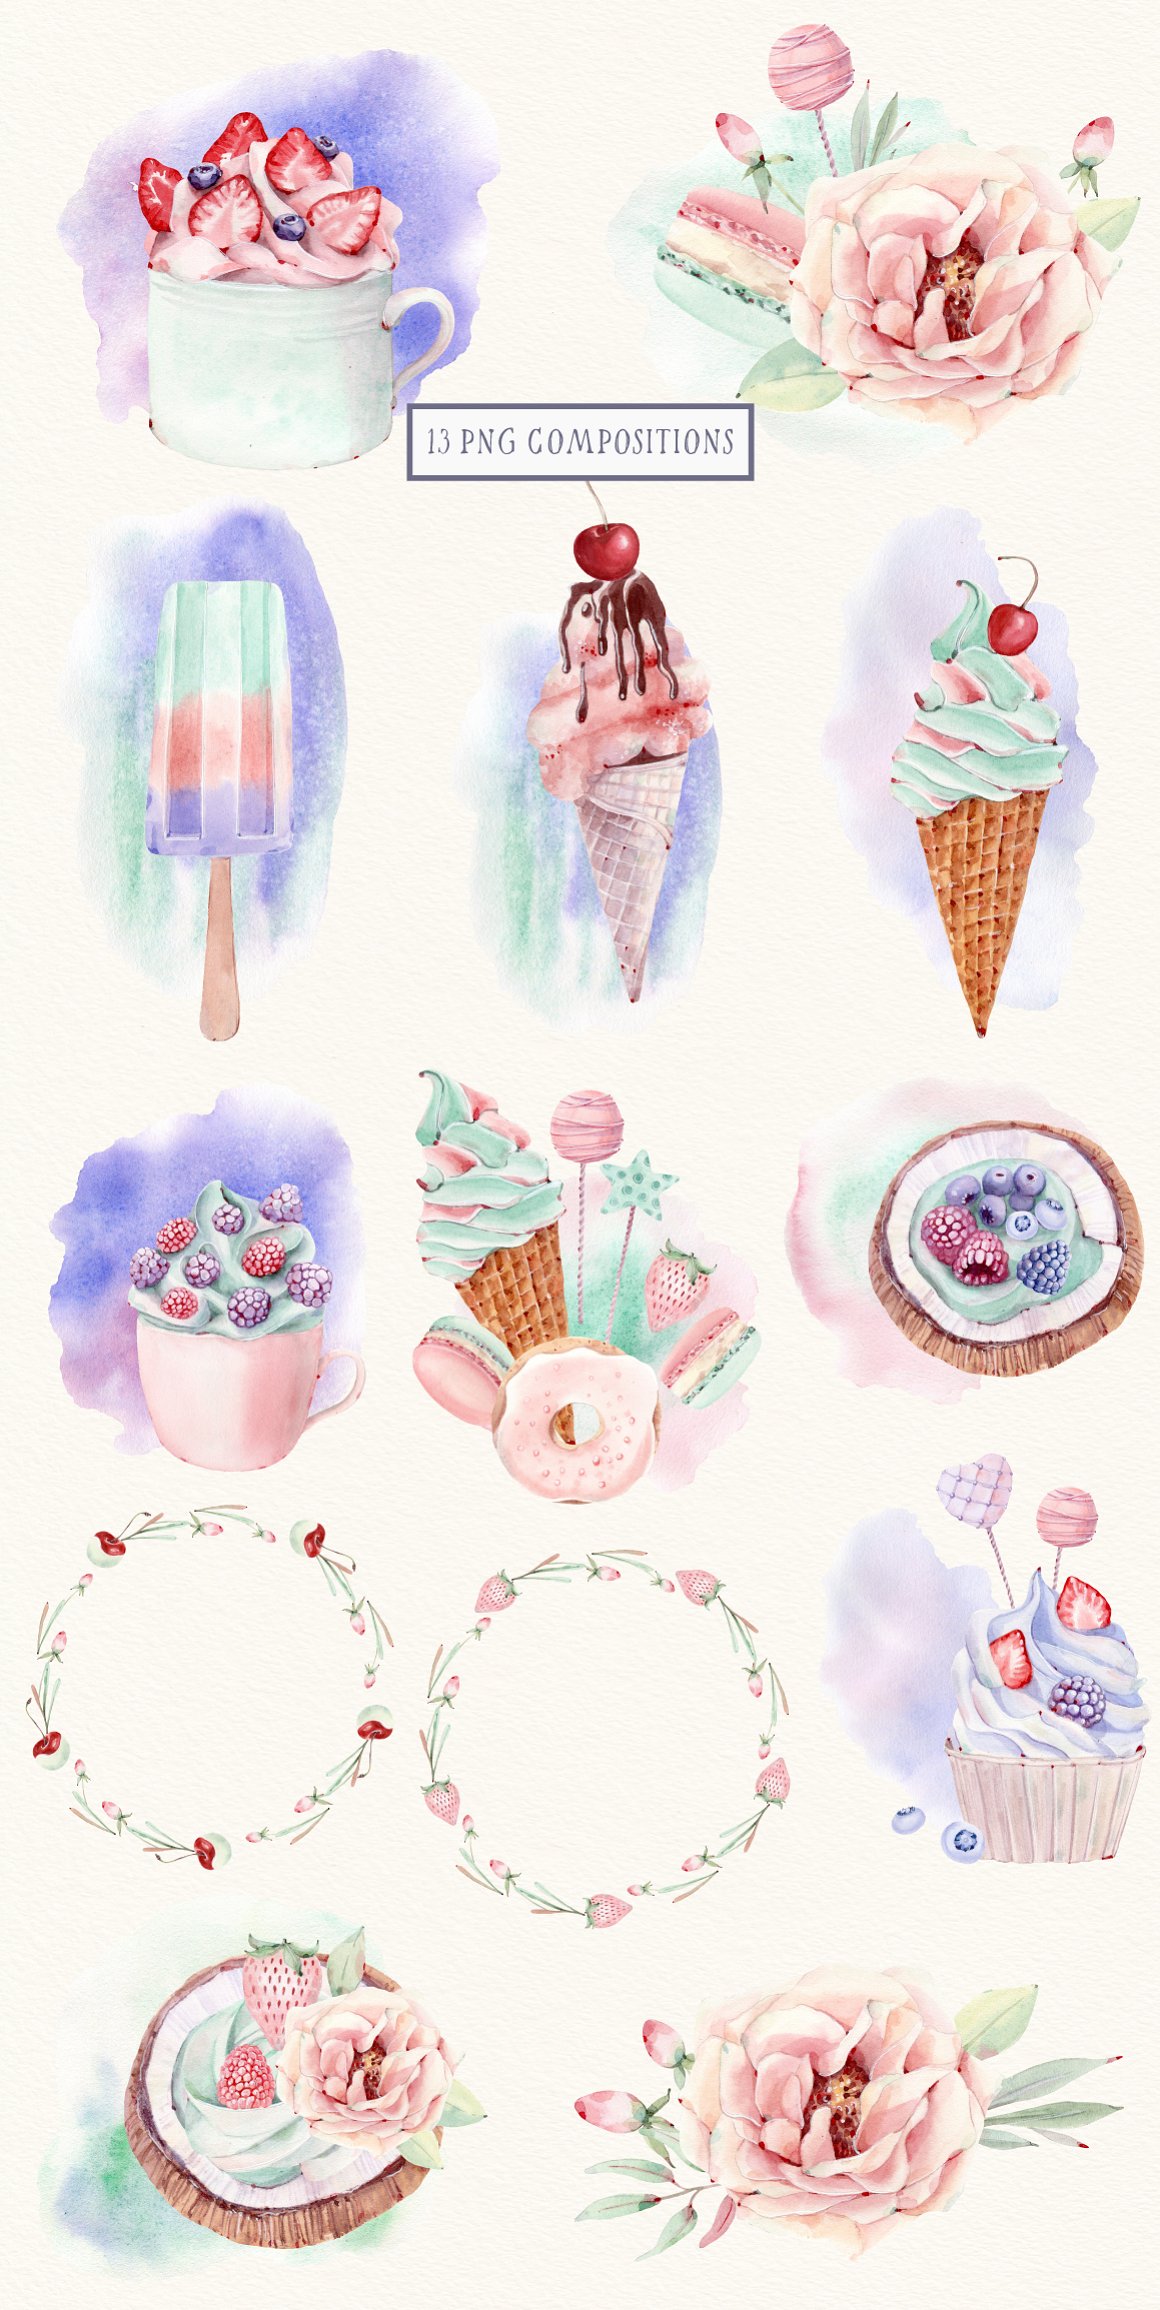 A set of 13 different illustrations of sweet and floral compositions on a gray background.